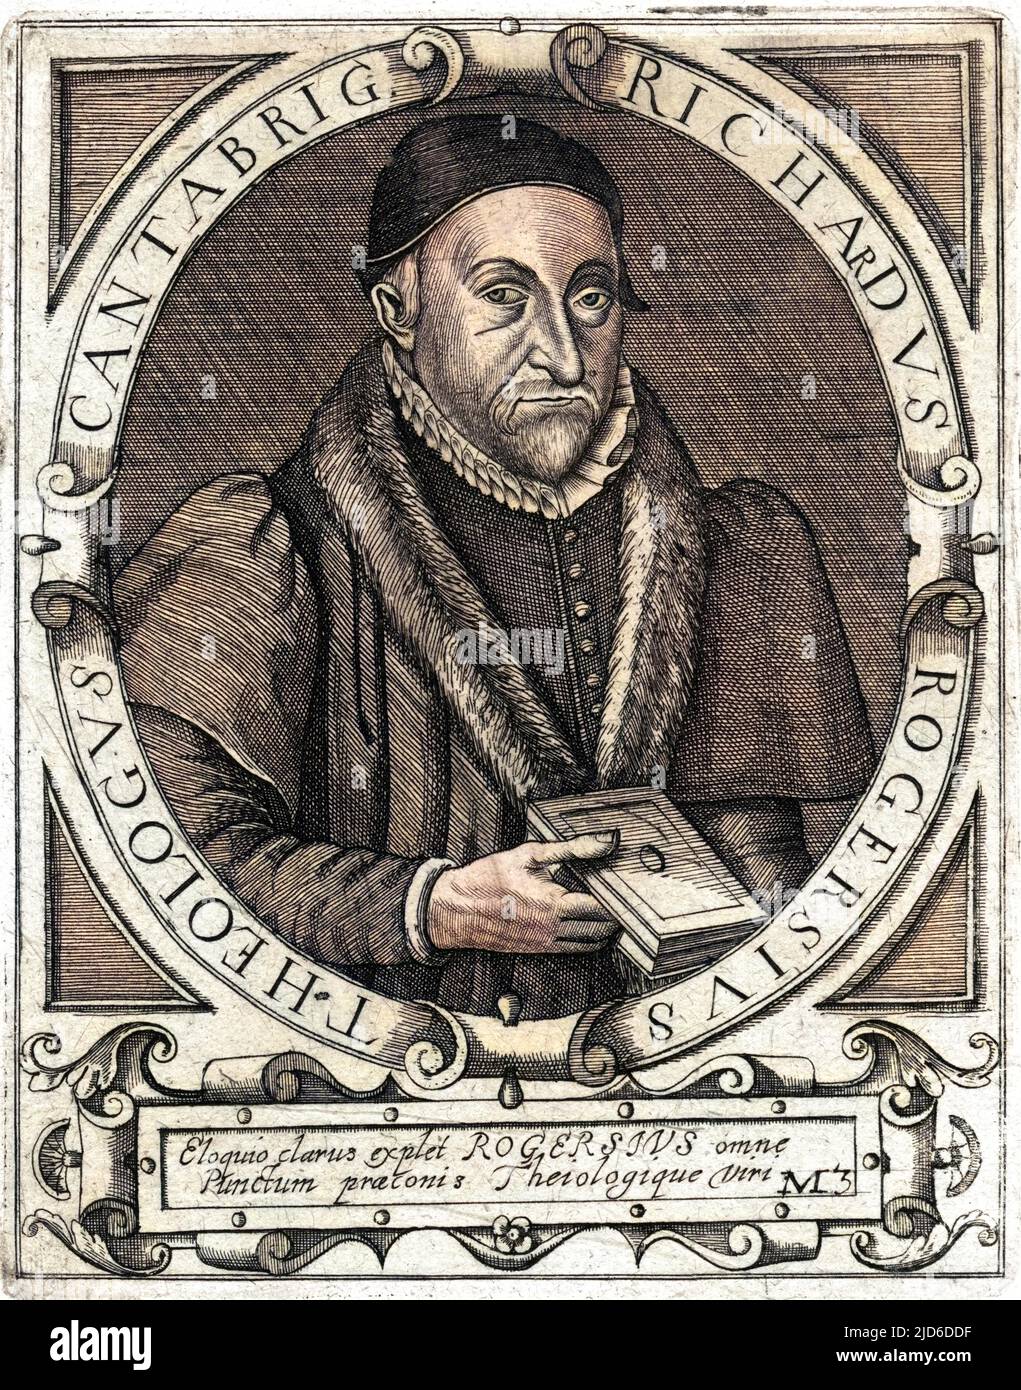 RICHARD ROGERS (1550 - 1618), Protestant churchman, theologian at Cambridge. Colourised version of : 10174441 Stock Photo